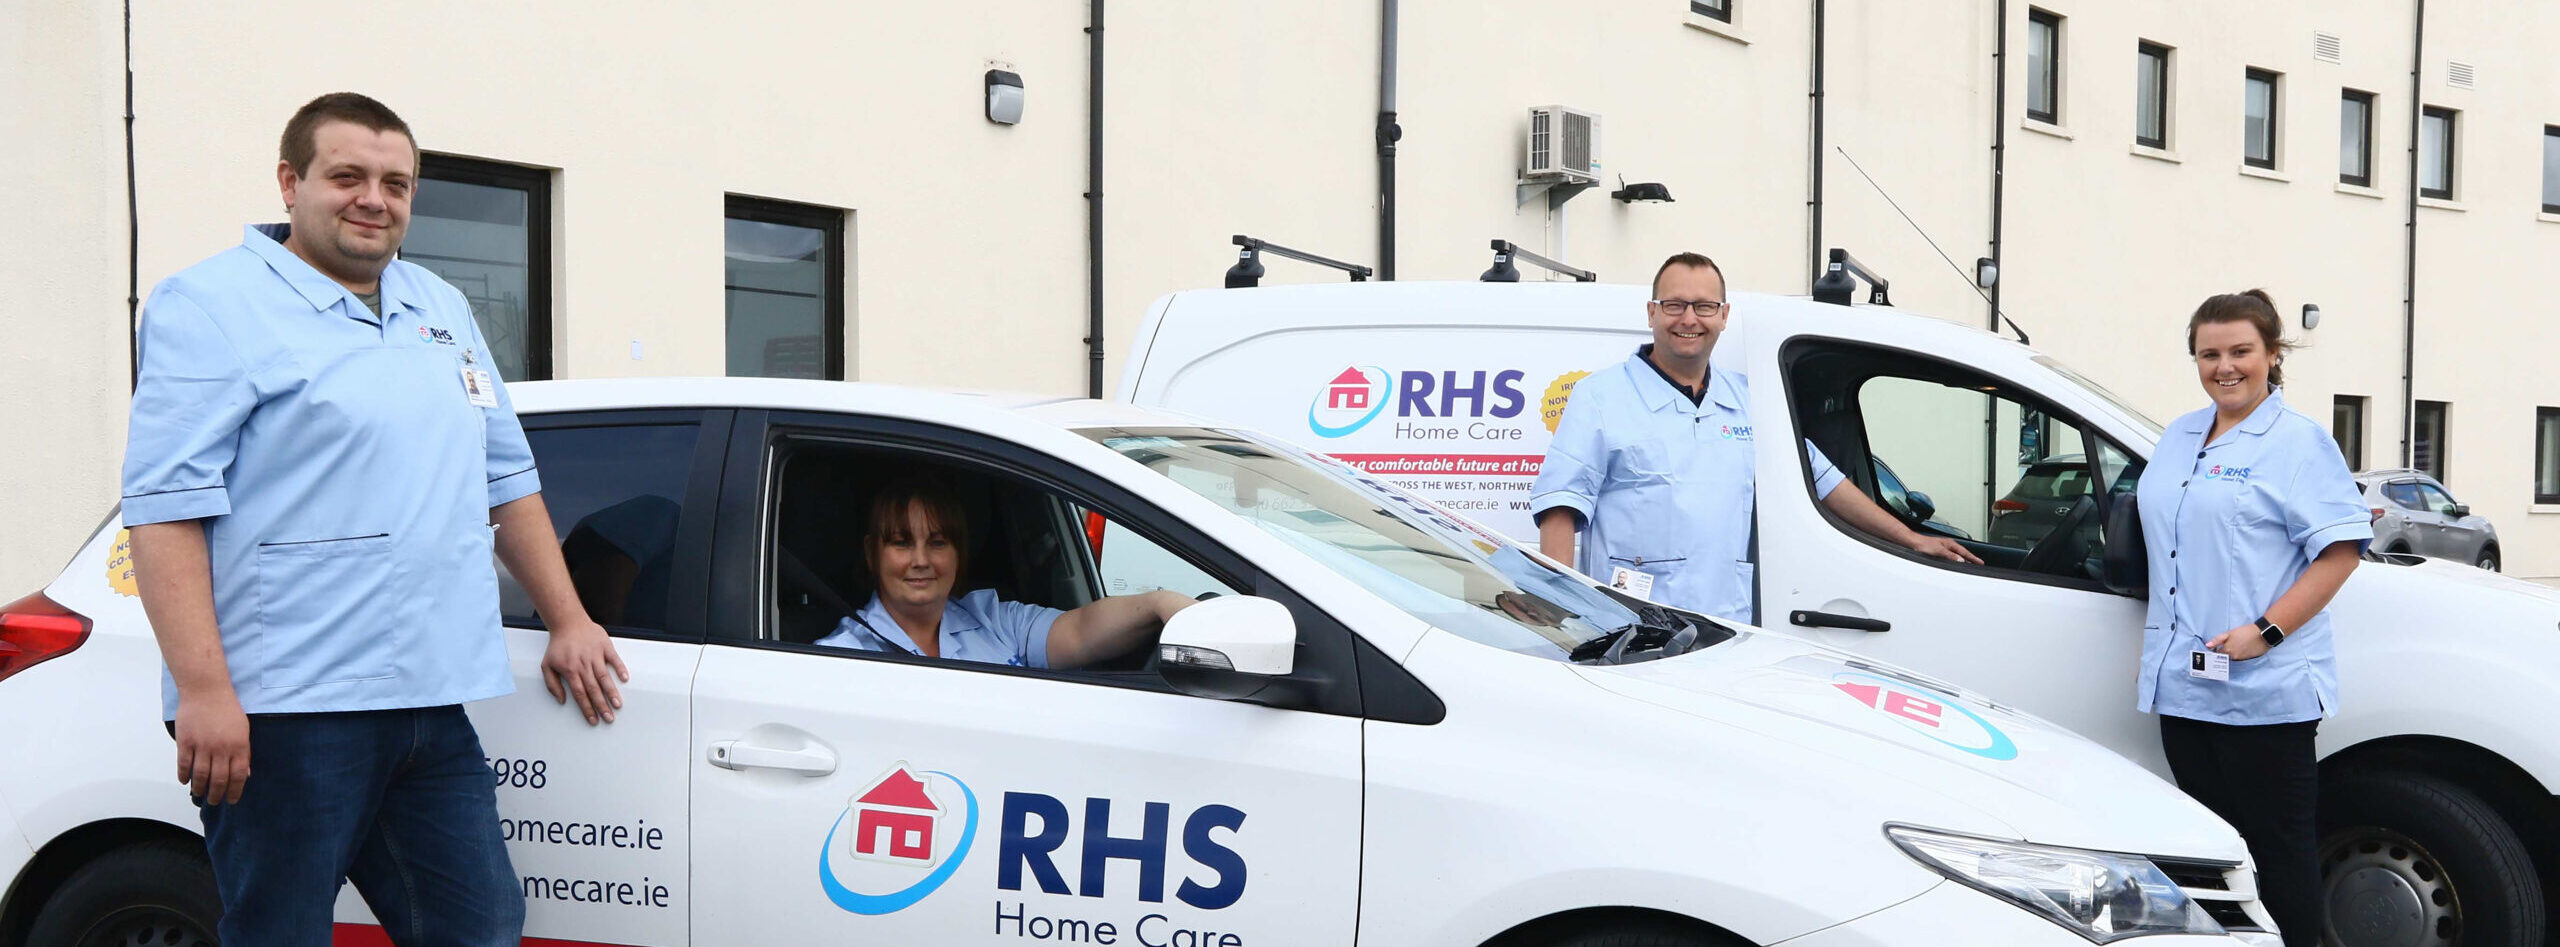 Care Assistants standing by RHS Car